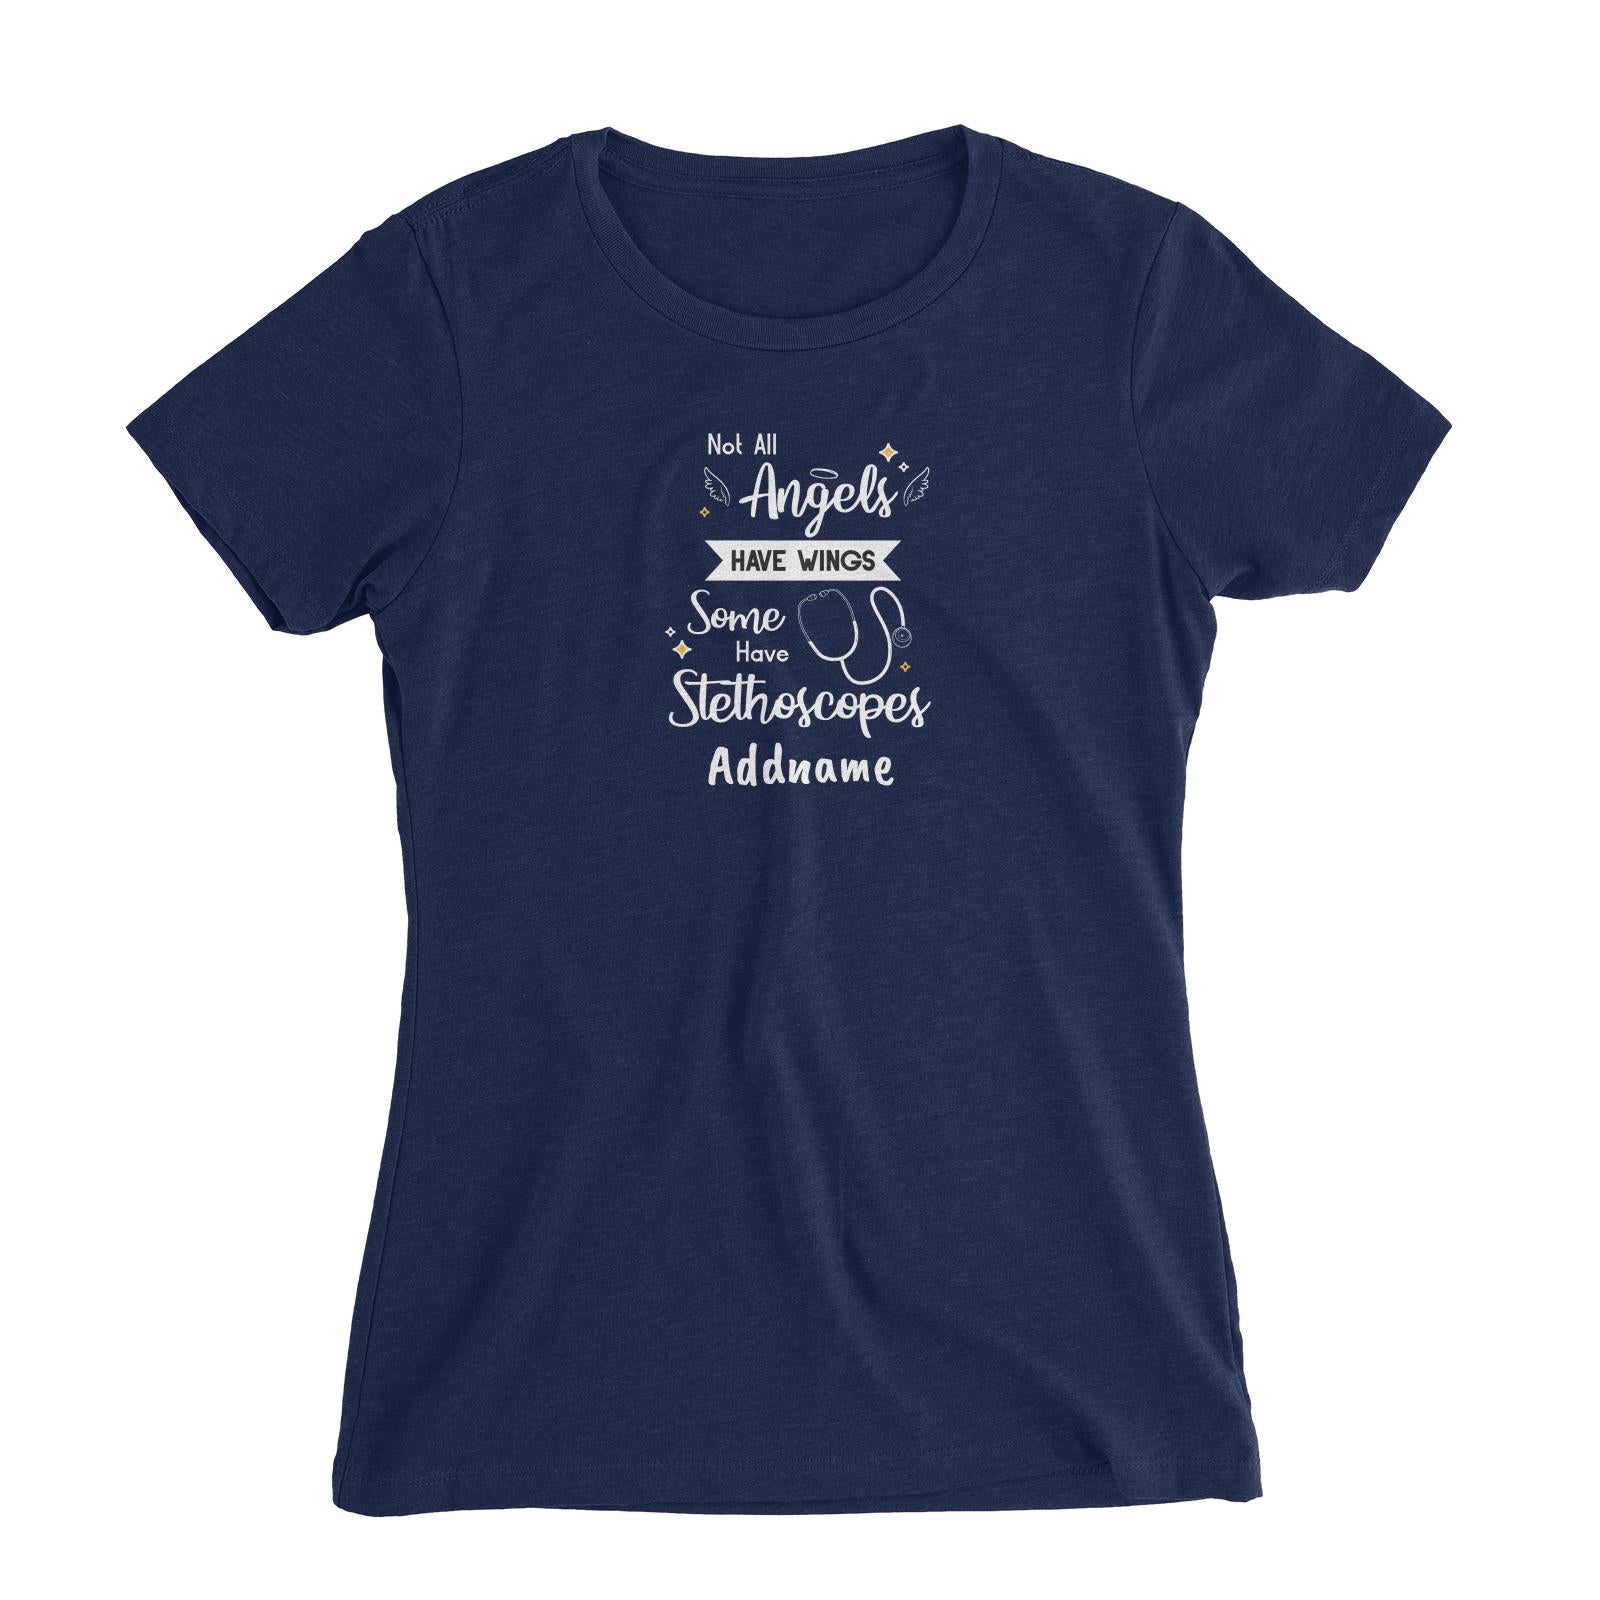 Not All Angels Have Wings, Some Have Stethoscopes Women's Slim Fit T-Shirt